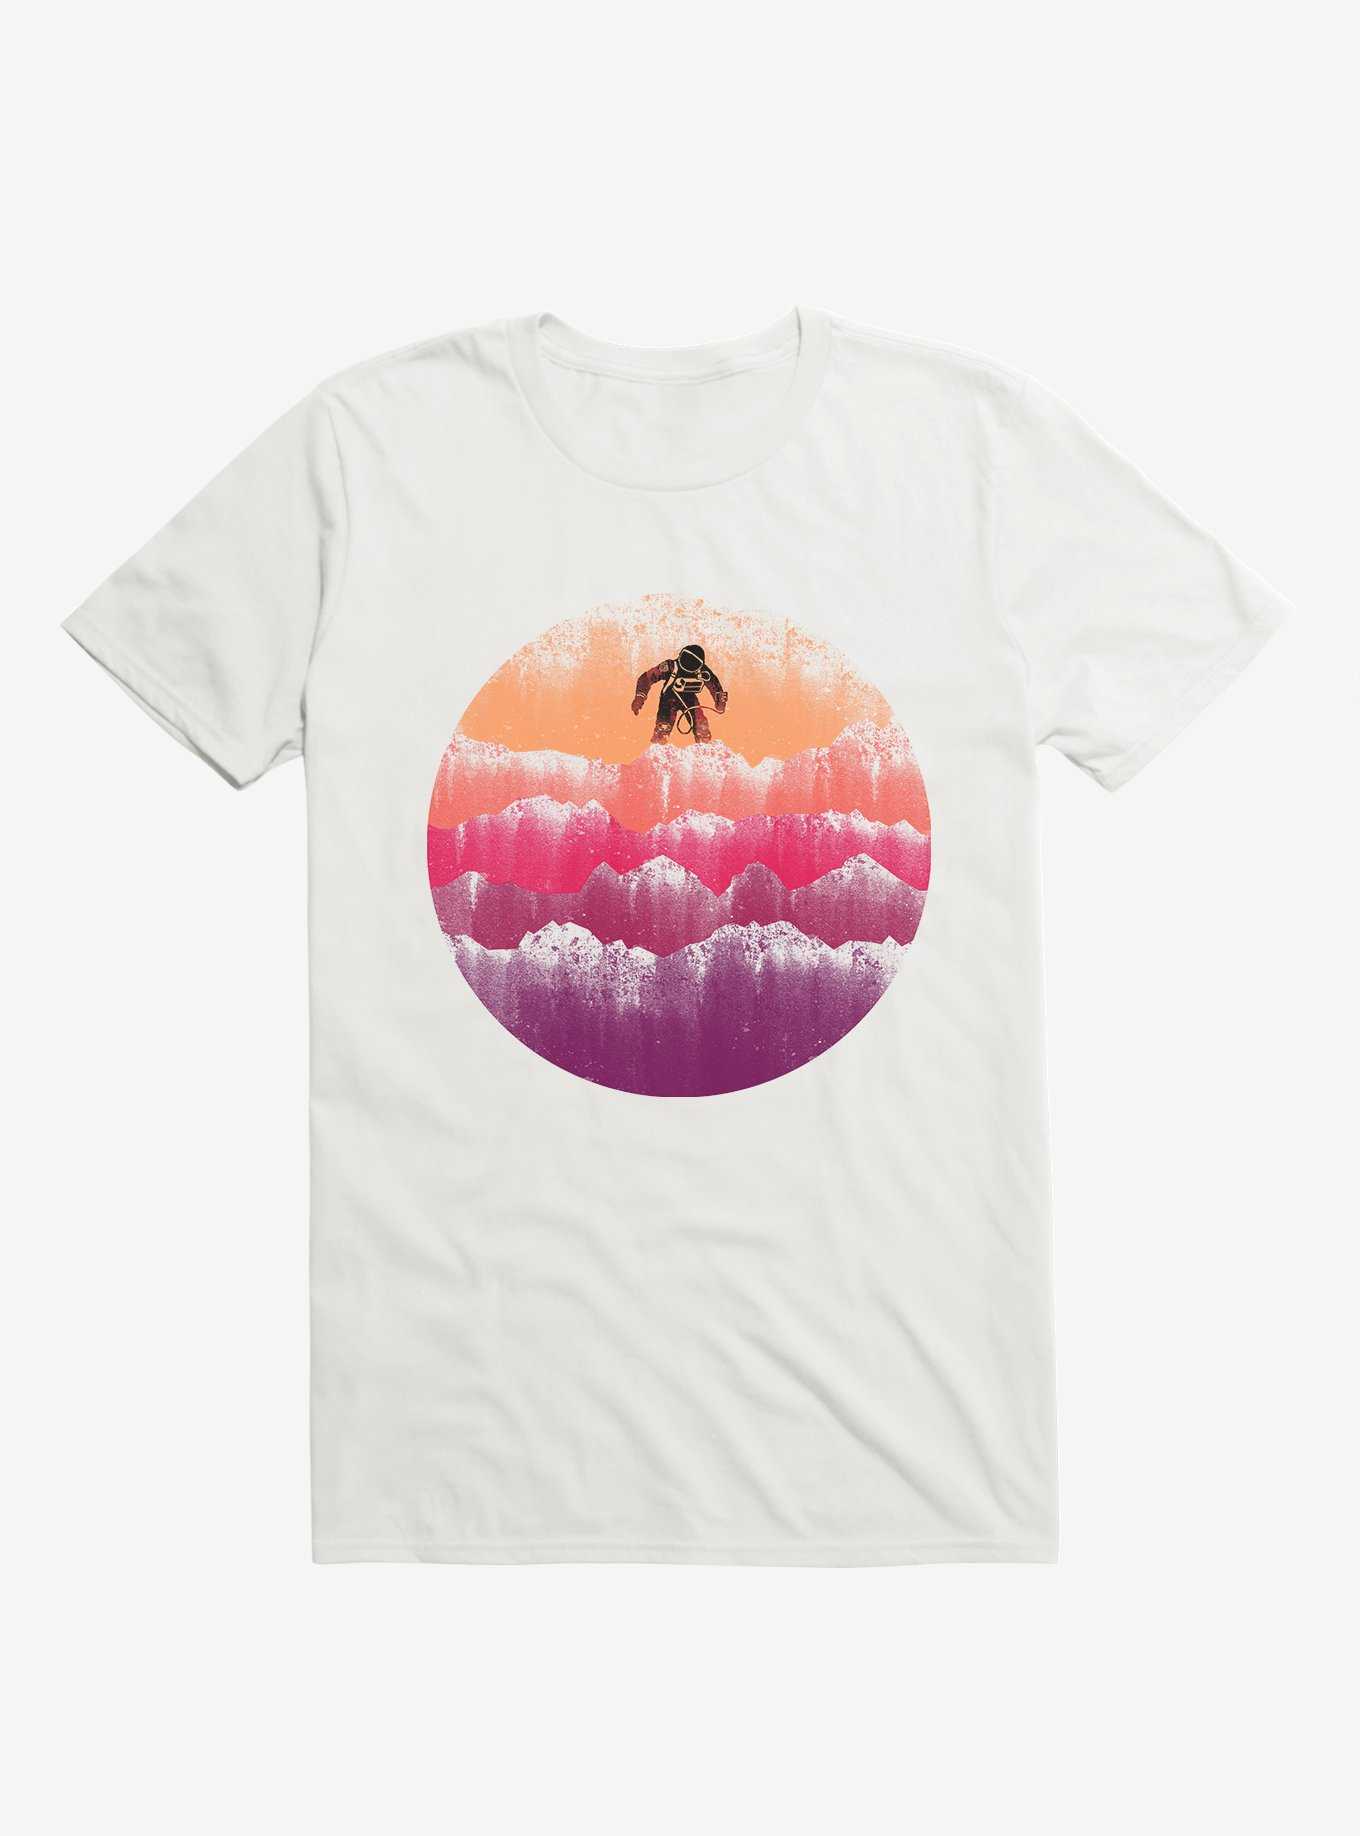 A Scene From Mars Astronaut White T-Shirt, , hi-res